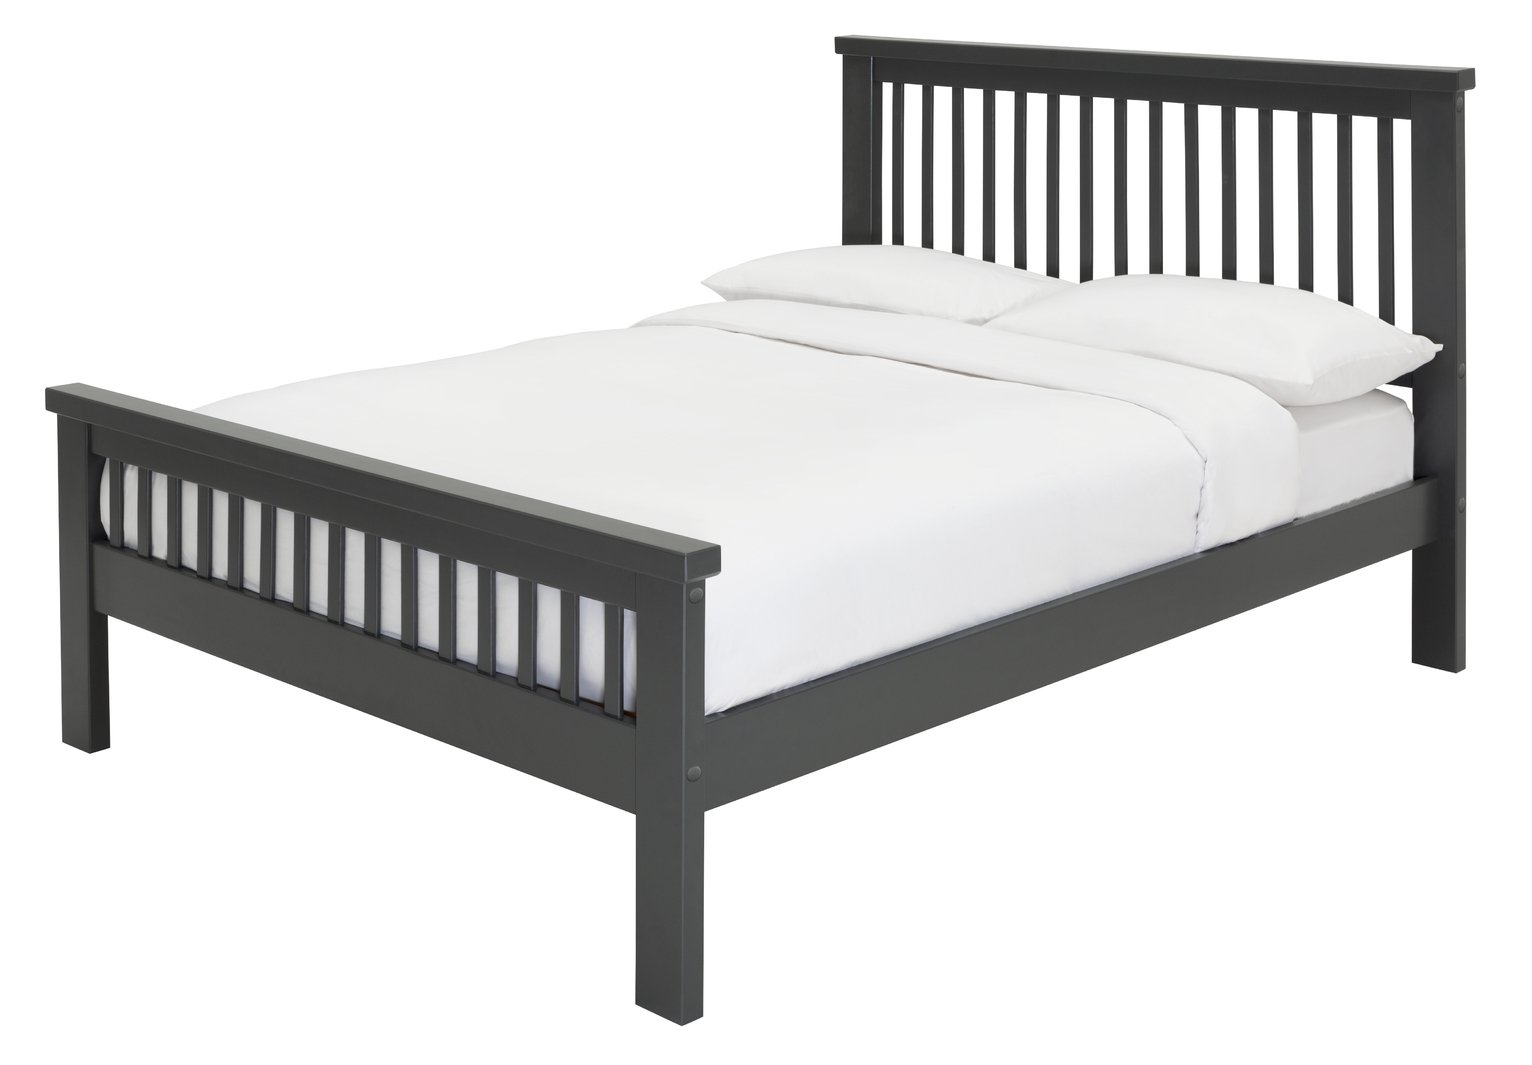 Argos Home Aubrey Double Wooden Bed Frame - Charcoal